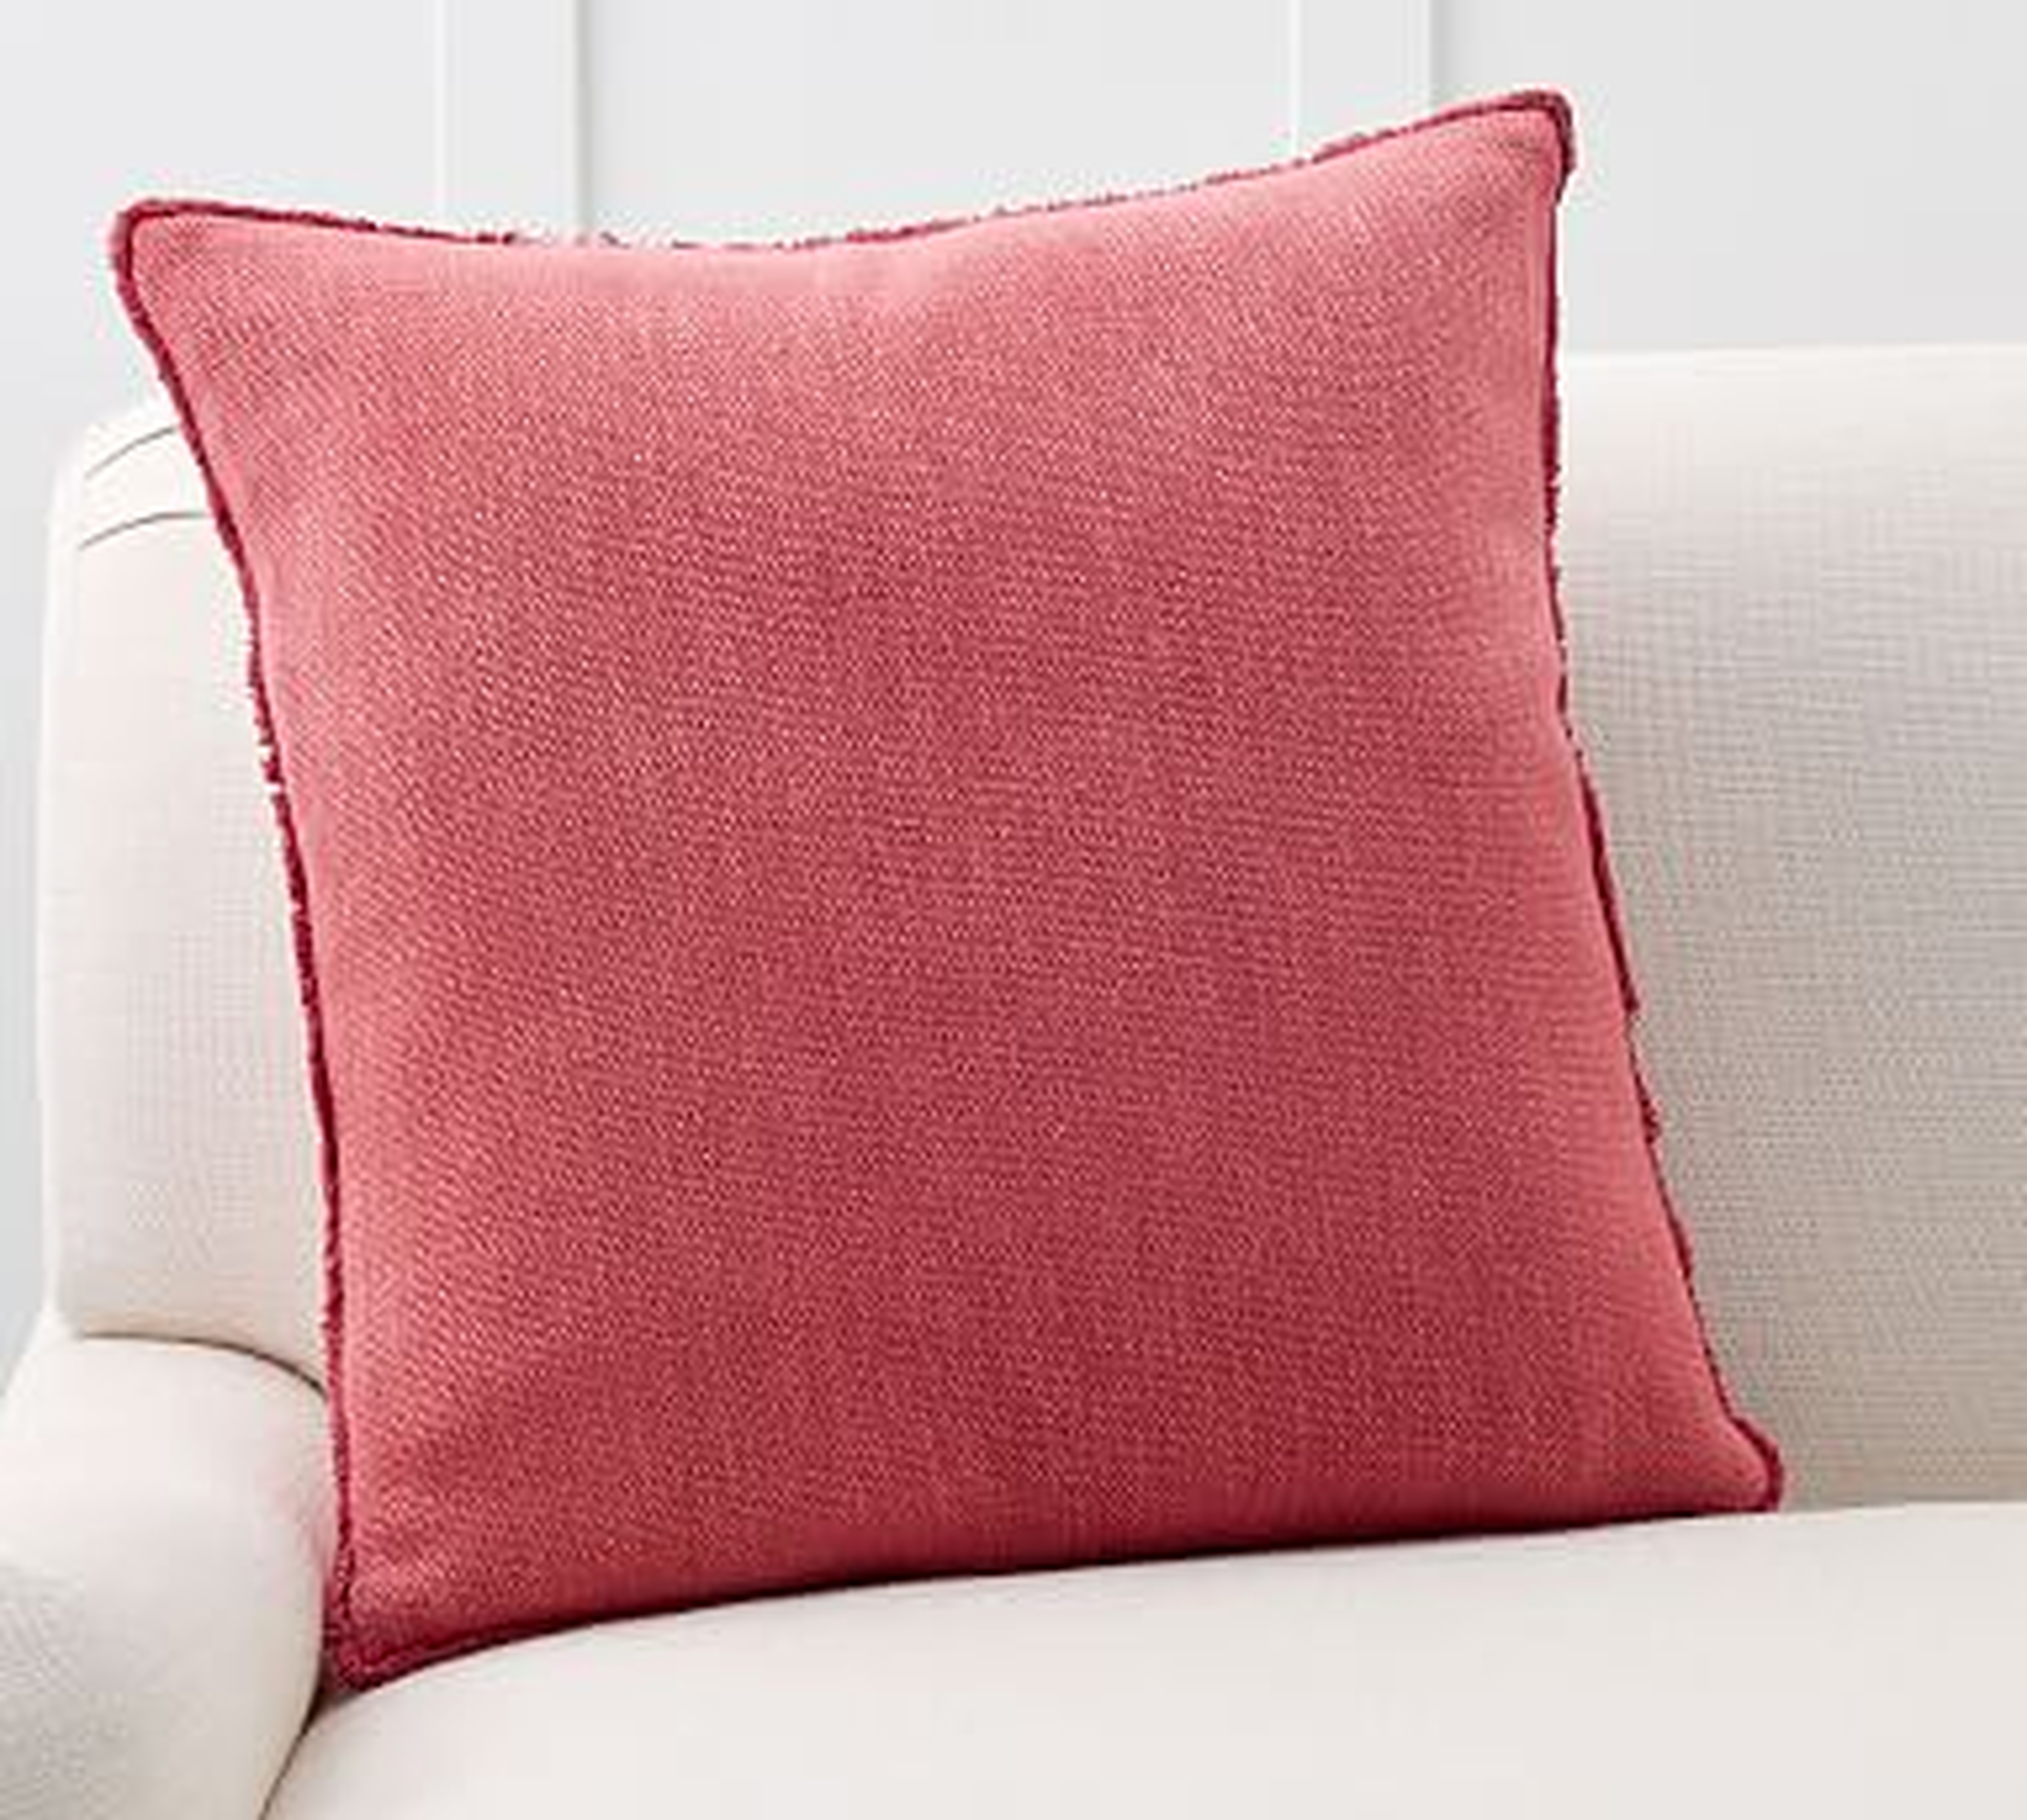 Willa Fringe Textured Pillow Cover, 22", Strawberry - Pottery Barn